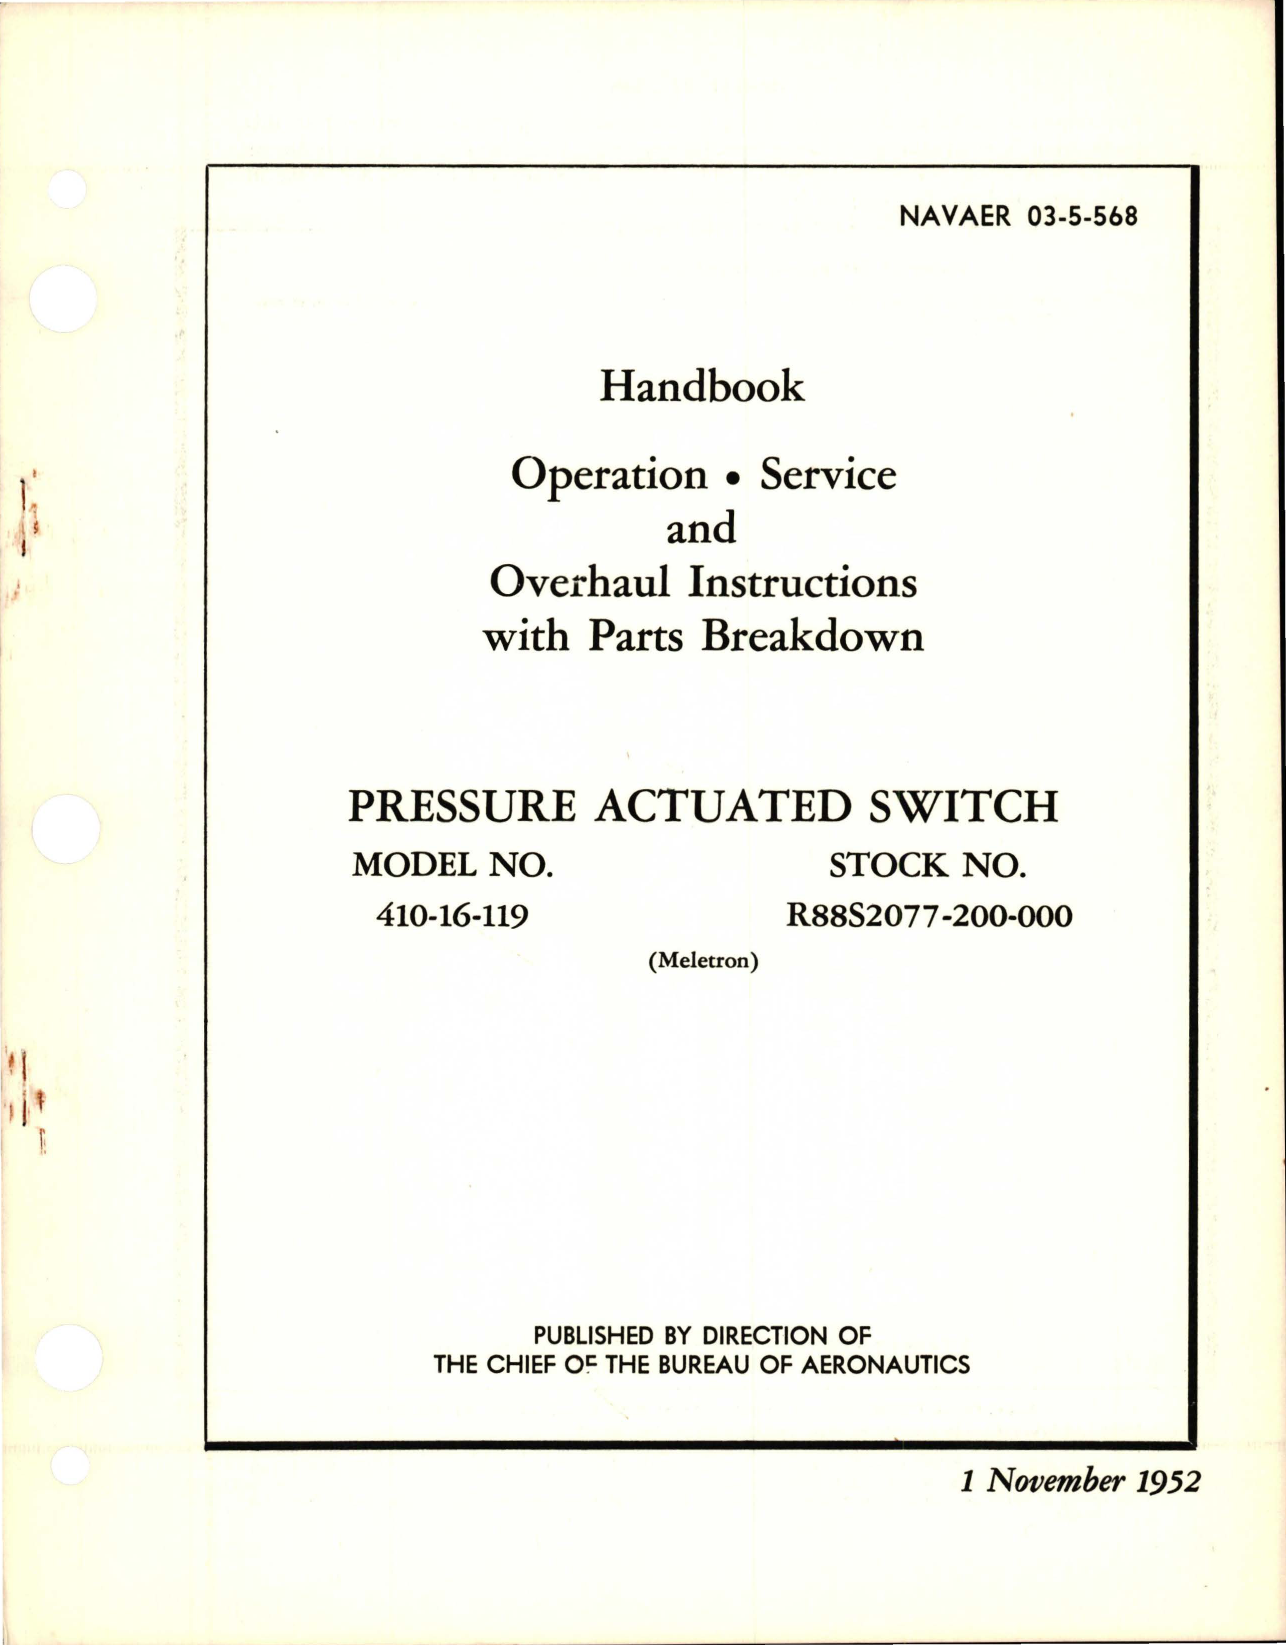 Sample page 1 from AirCorps Library document: Operation, Service & Overhaul Instructions w Parts Breakdown for Pressure Actuated Switch - Model 410-16-119 